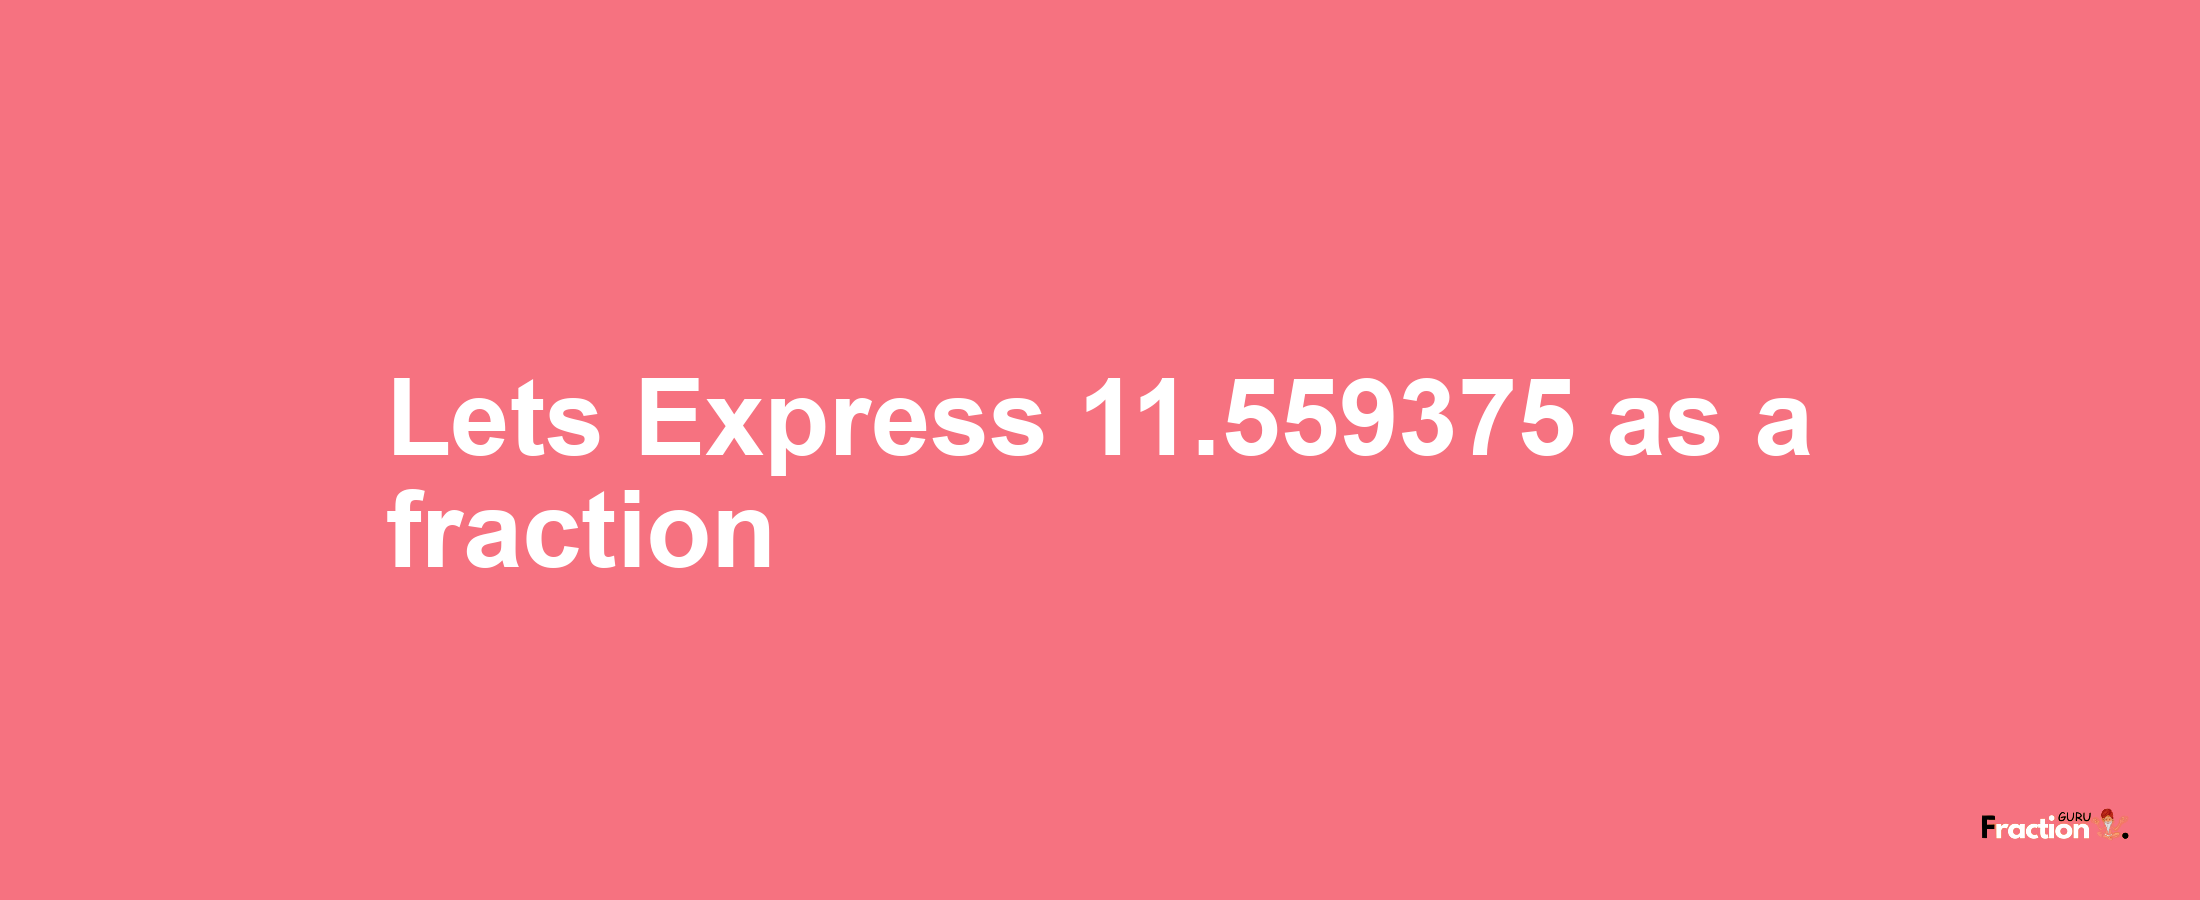 Lets Express 11.559375 as afraction